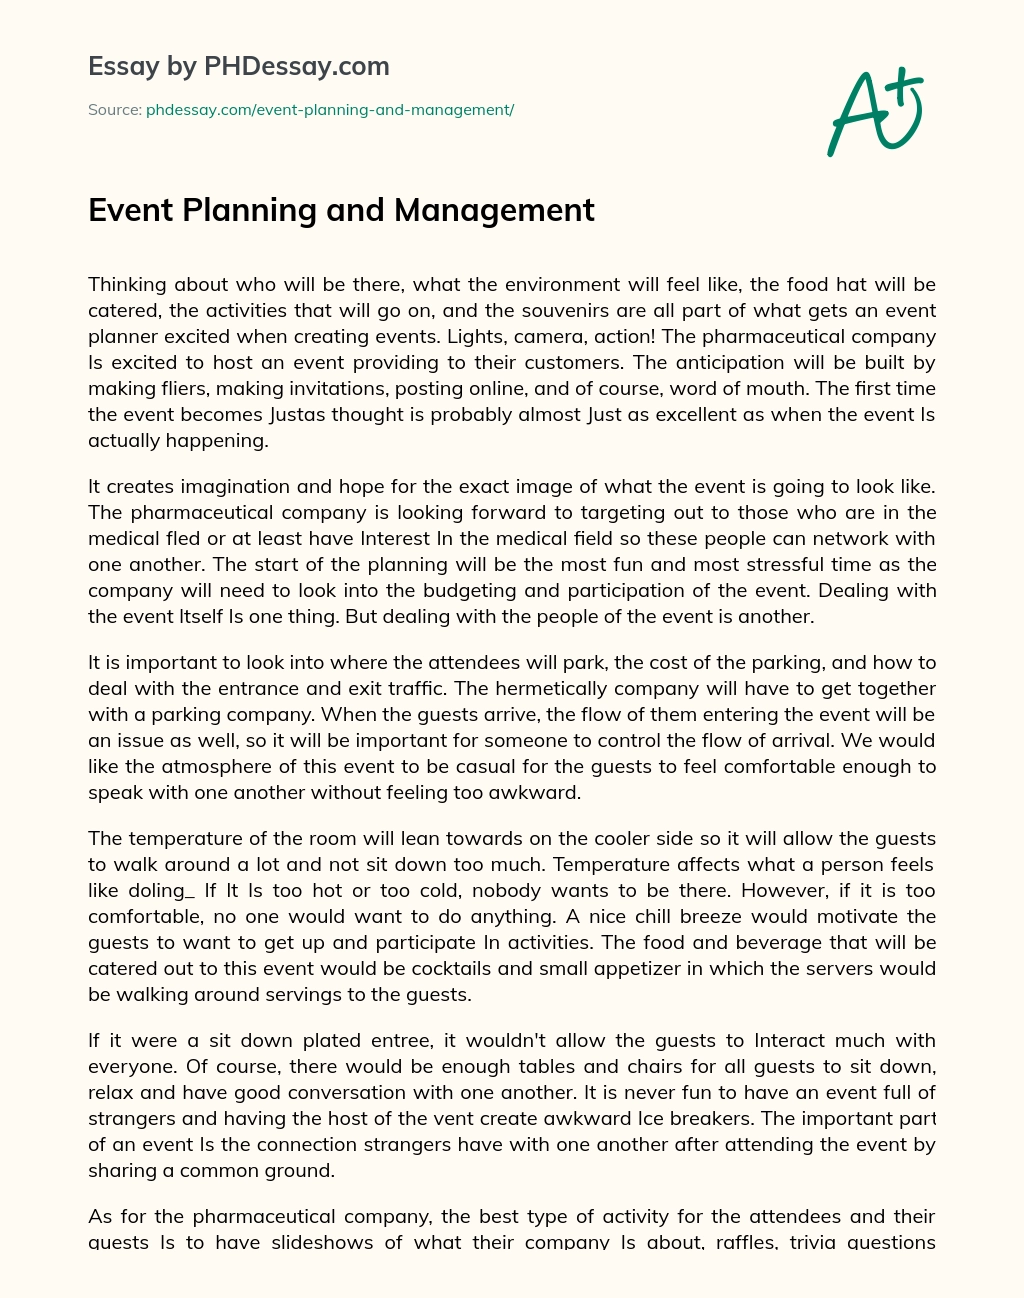 Event Planning and Management essay